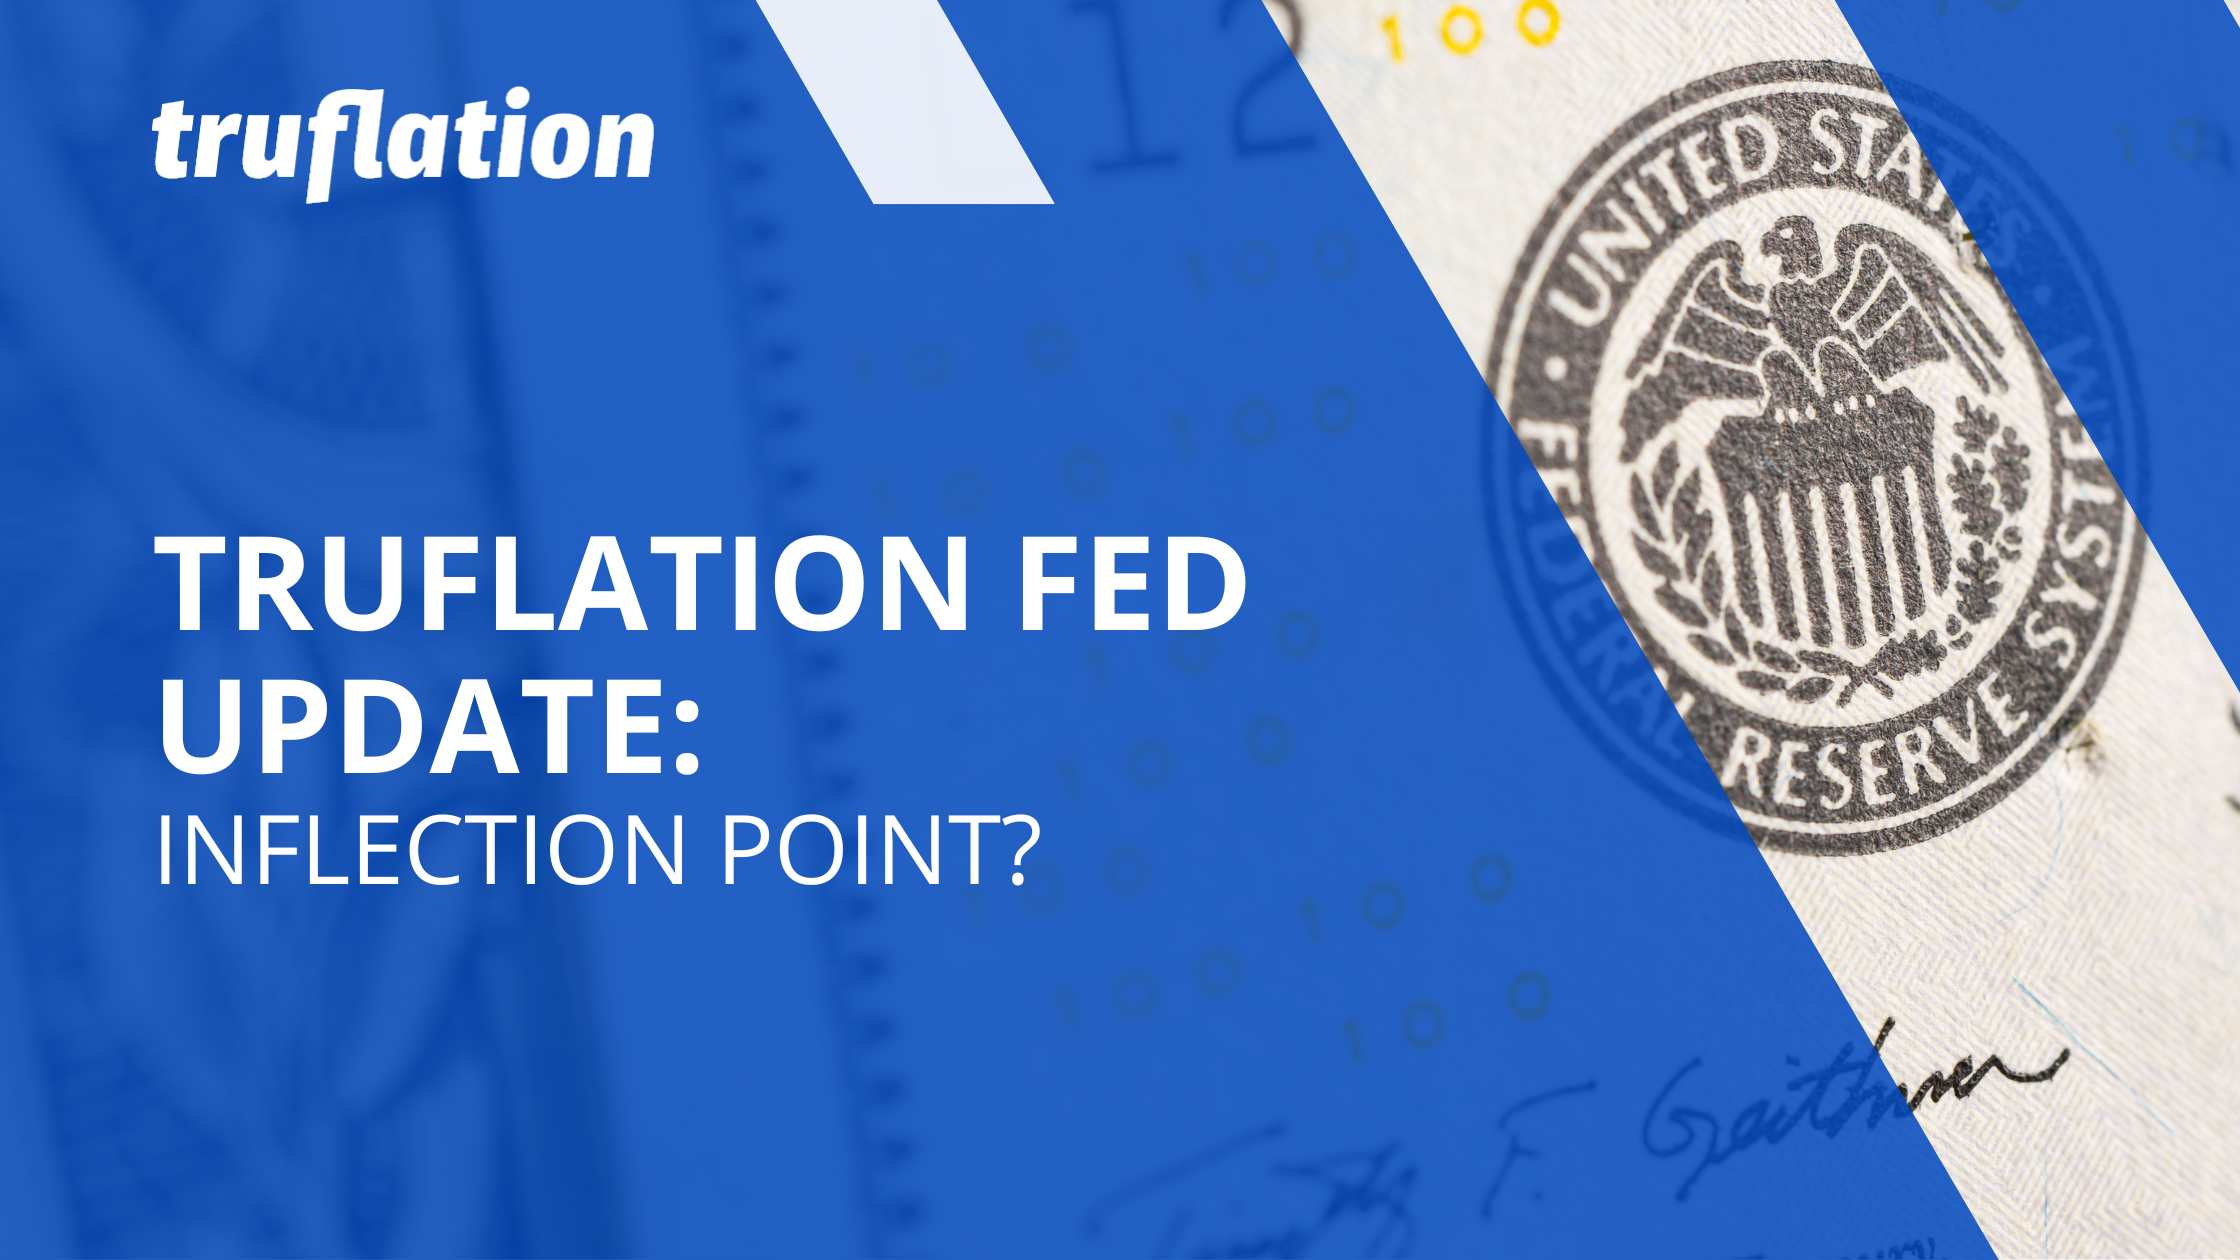 Truflation Fed Update: inflection point?